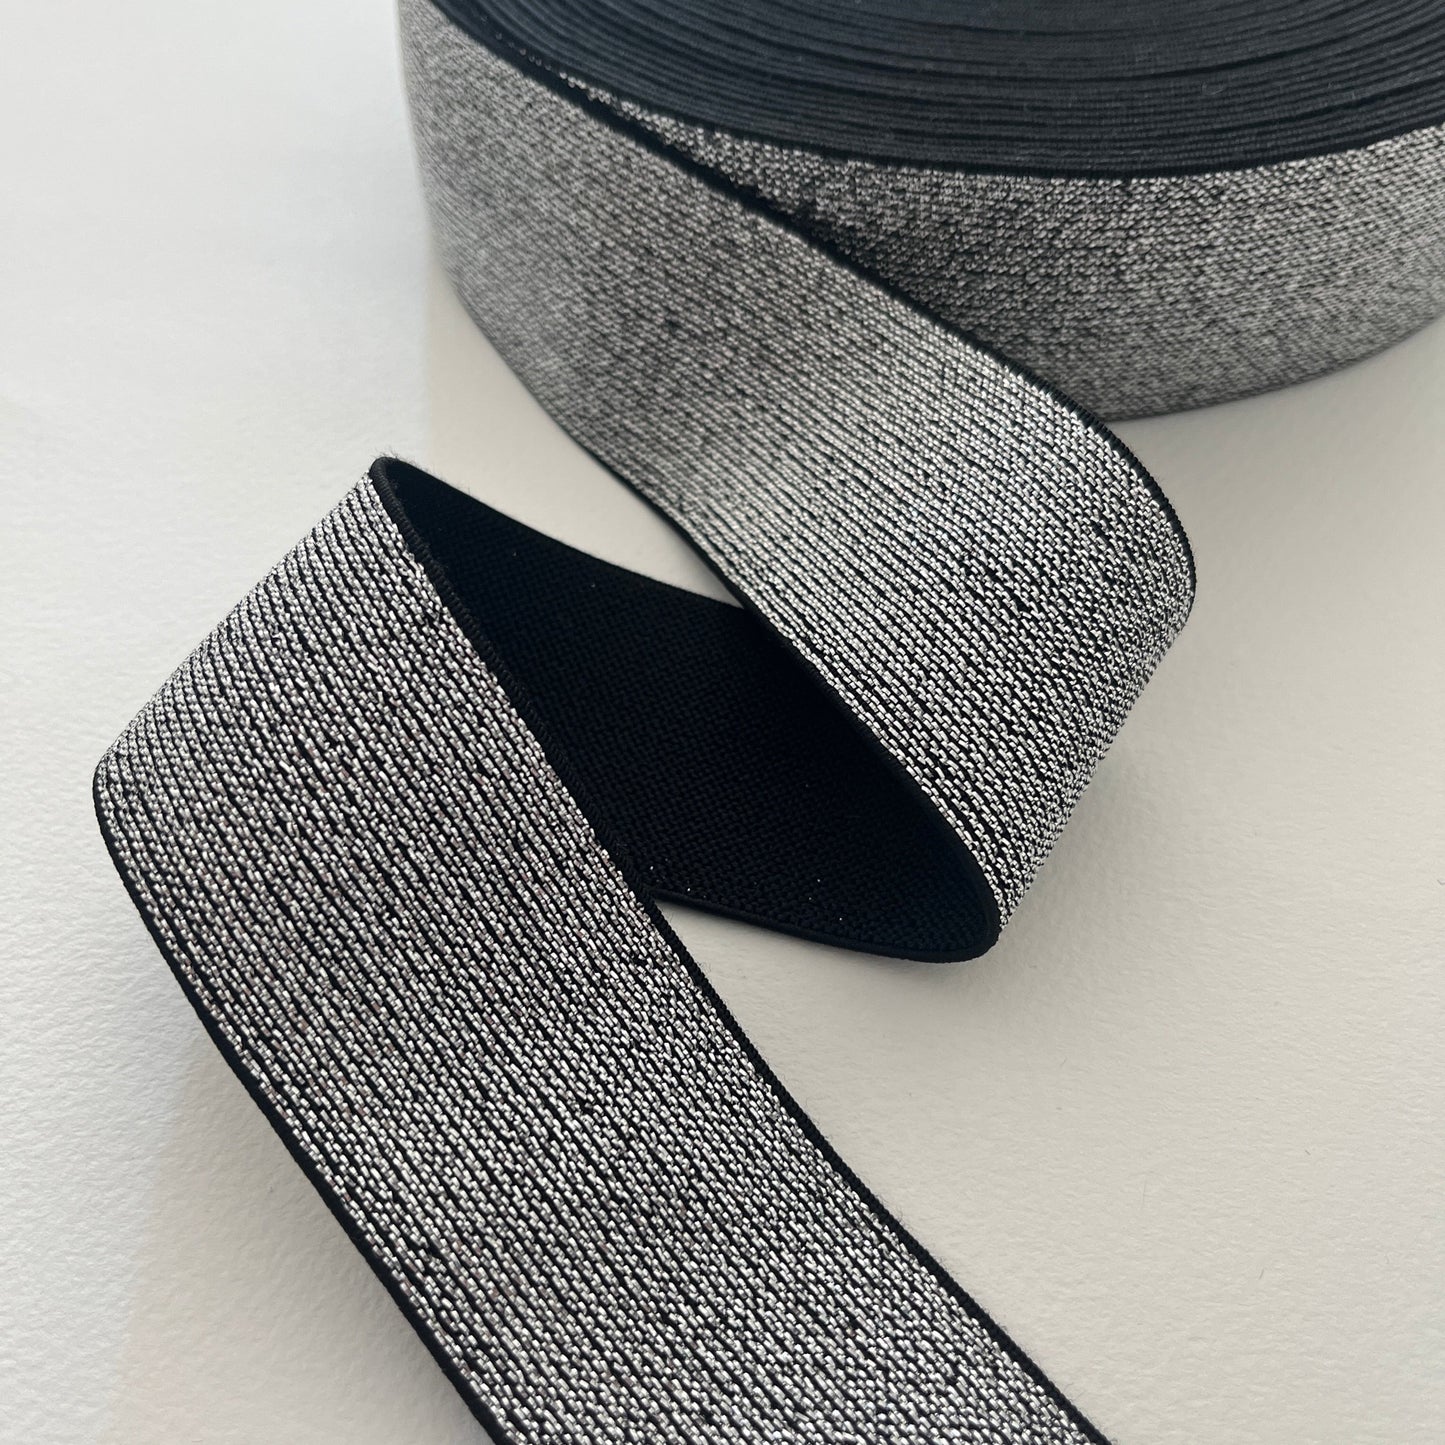 How fabulous are these lurex elastics? Perfect for adding a bit of sparkle and stretch to a waistband, cuff or elasticated belt. Can be worn directly against the skin as it is soft and non-scratchy on the reverse side. silver sparkly elastic